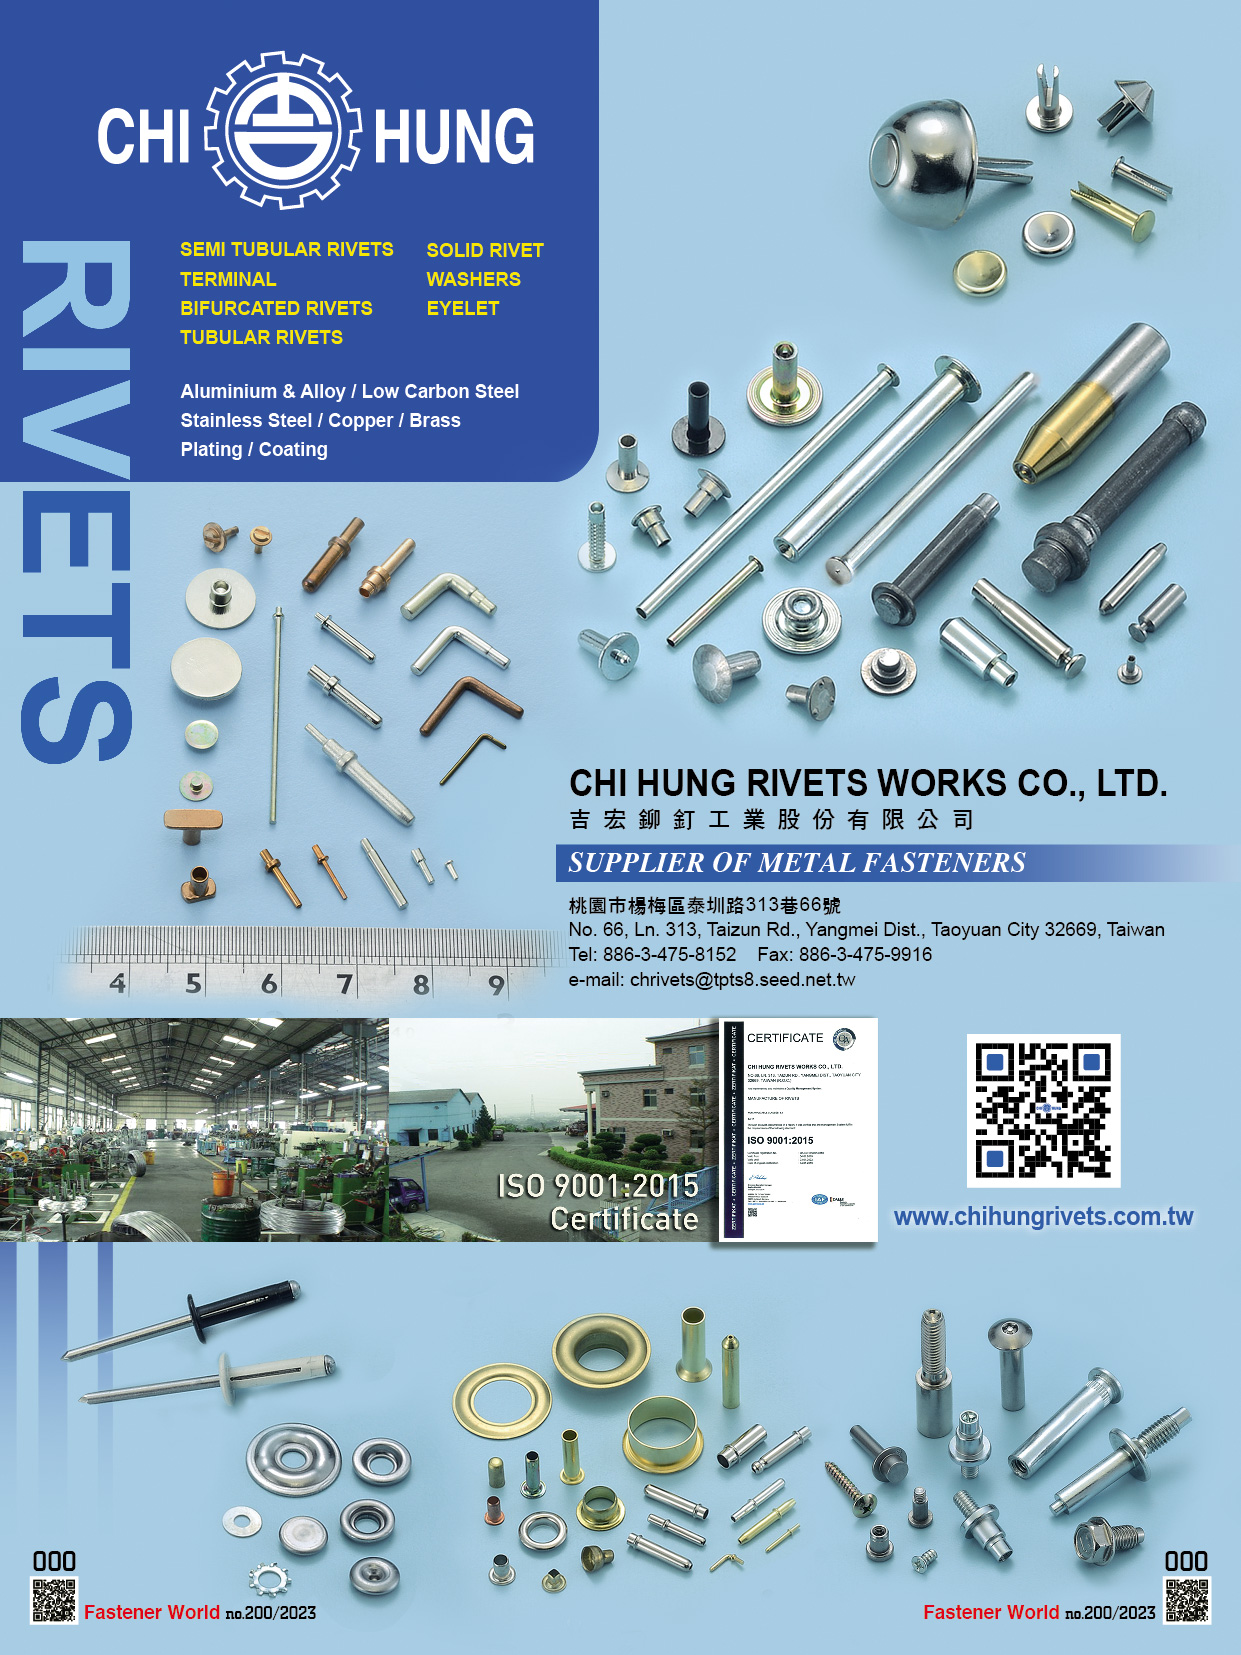 CHI HUNG RIVETS WORKS CO., LTD.  , Semi Tubular Rivets, Blind Rivets (Split), Bifurcated Rivets, Tubular Rivets, Solid Rivet, Washers, Eyelet, Aluminium & Alloy, Low Carbon Steel, Stainless Steel, Copper, Brass, Plating, Coating, Special Screws , Semi-tubular Rivets